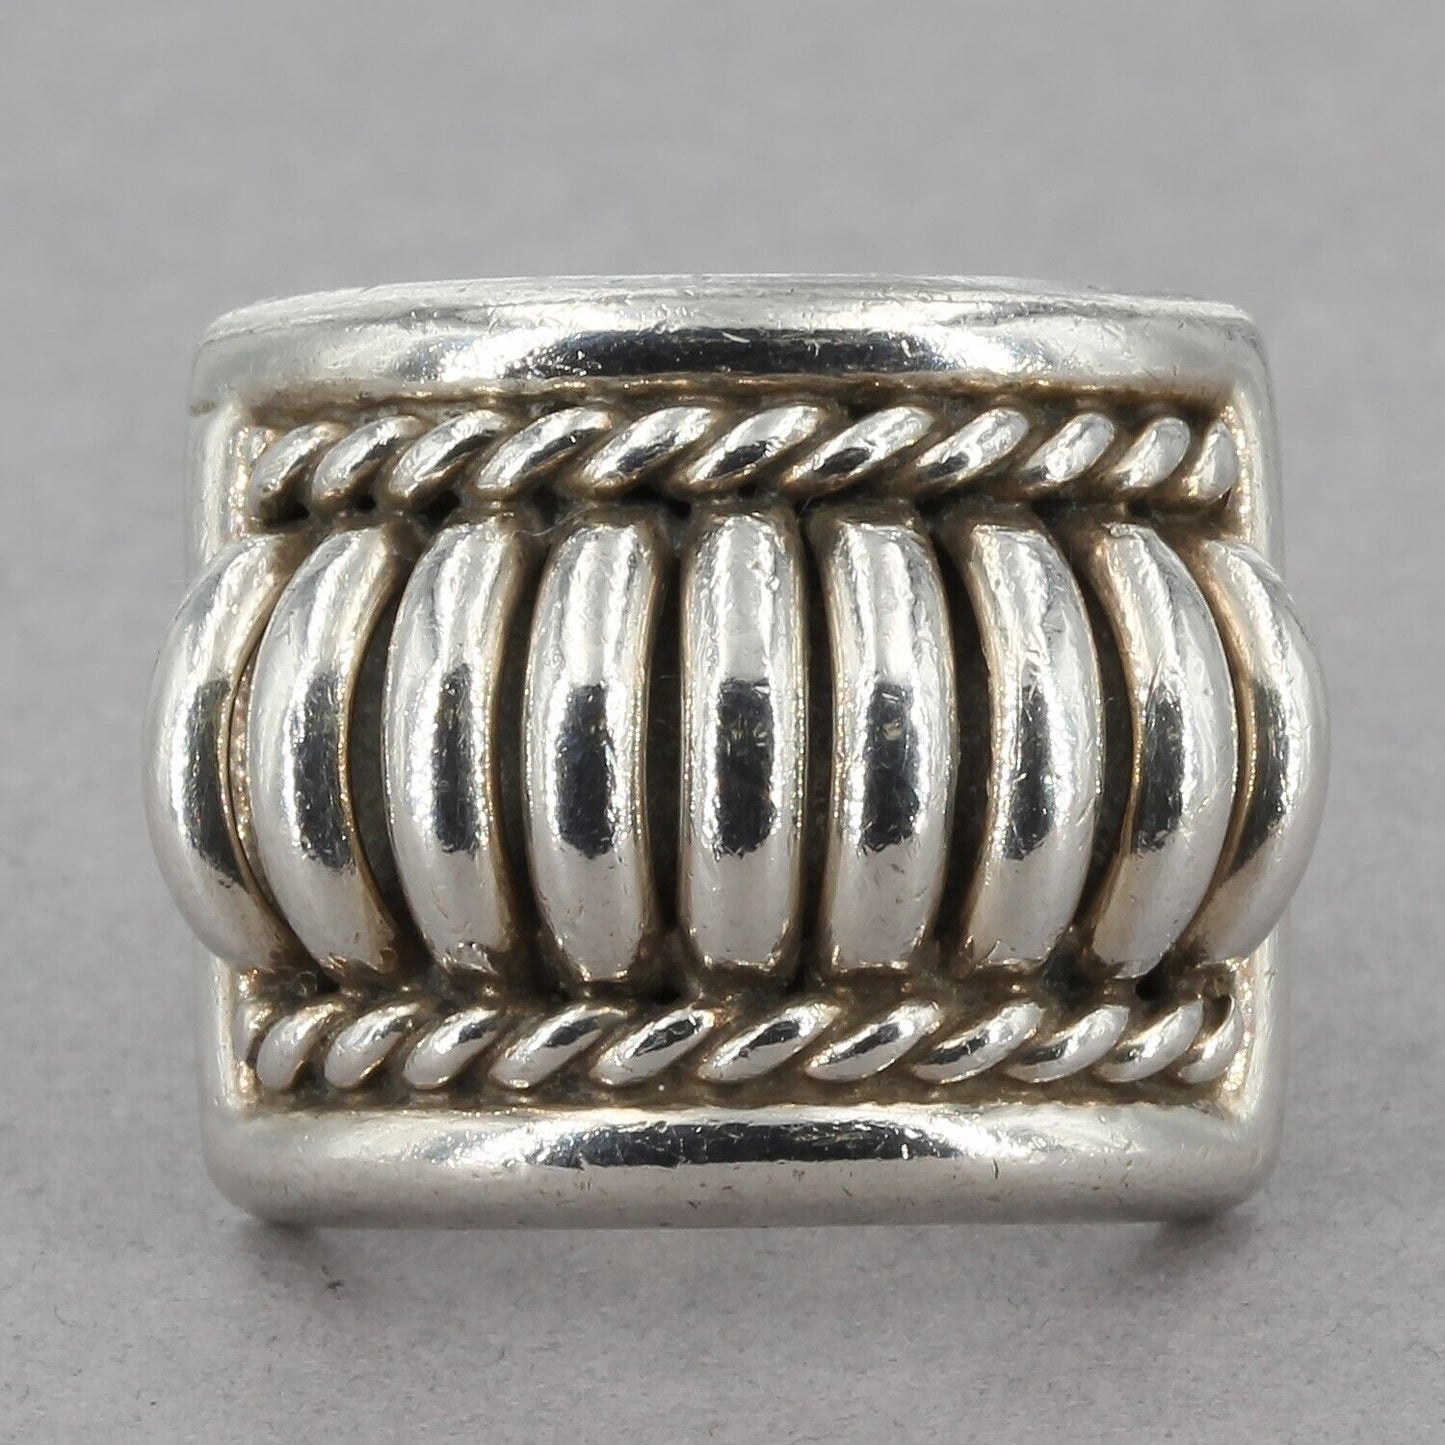 Native American Handcrafted Navajo Thomas Charley Sterling Silver Ring Size 5.75